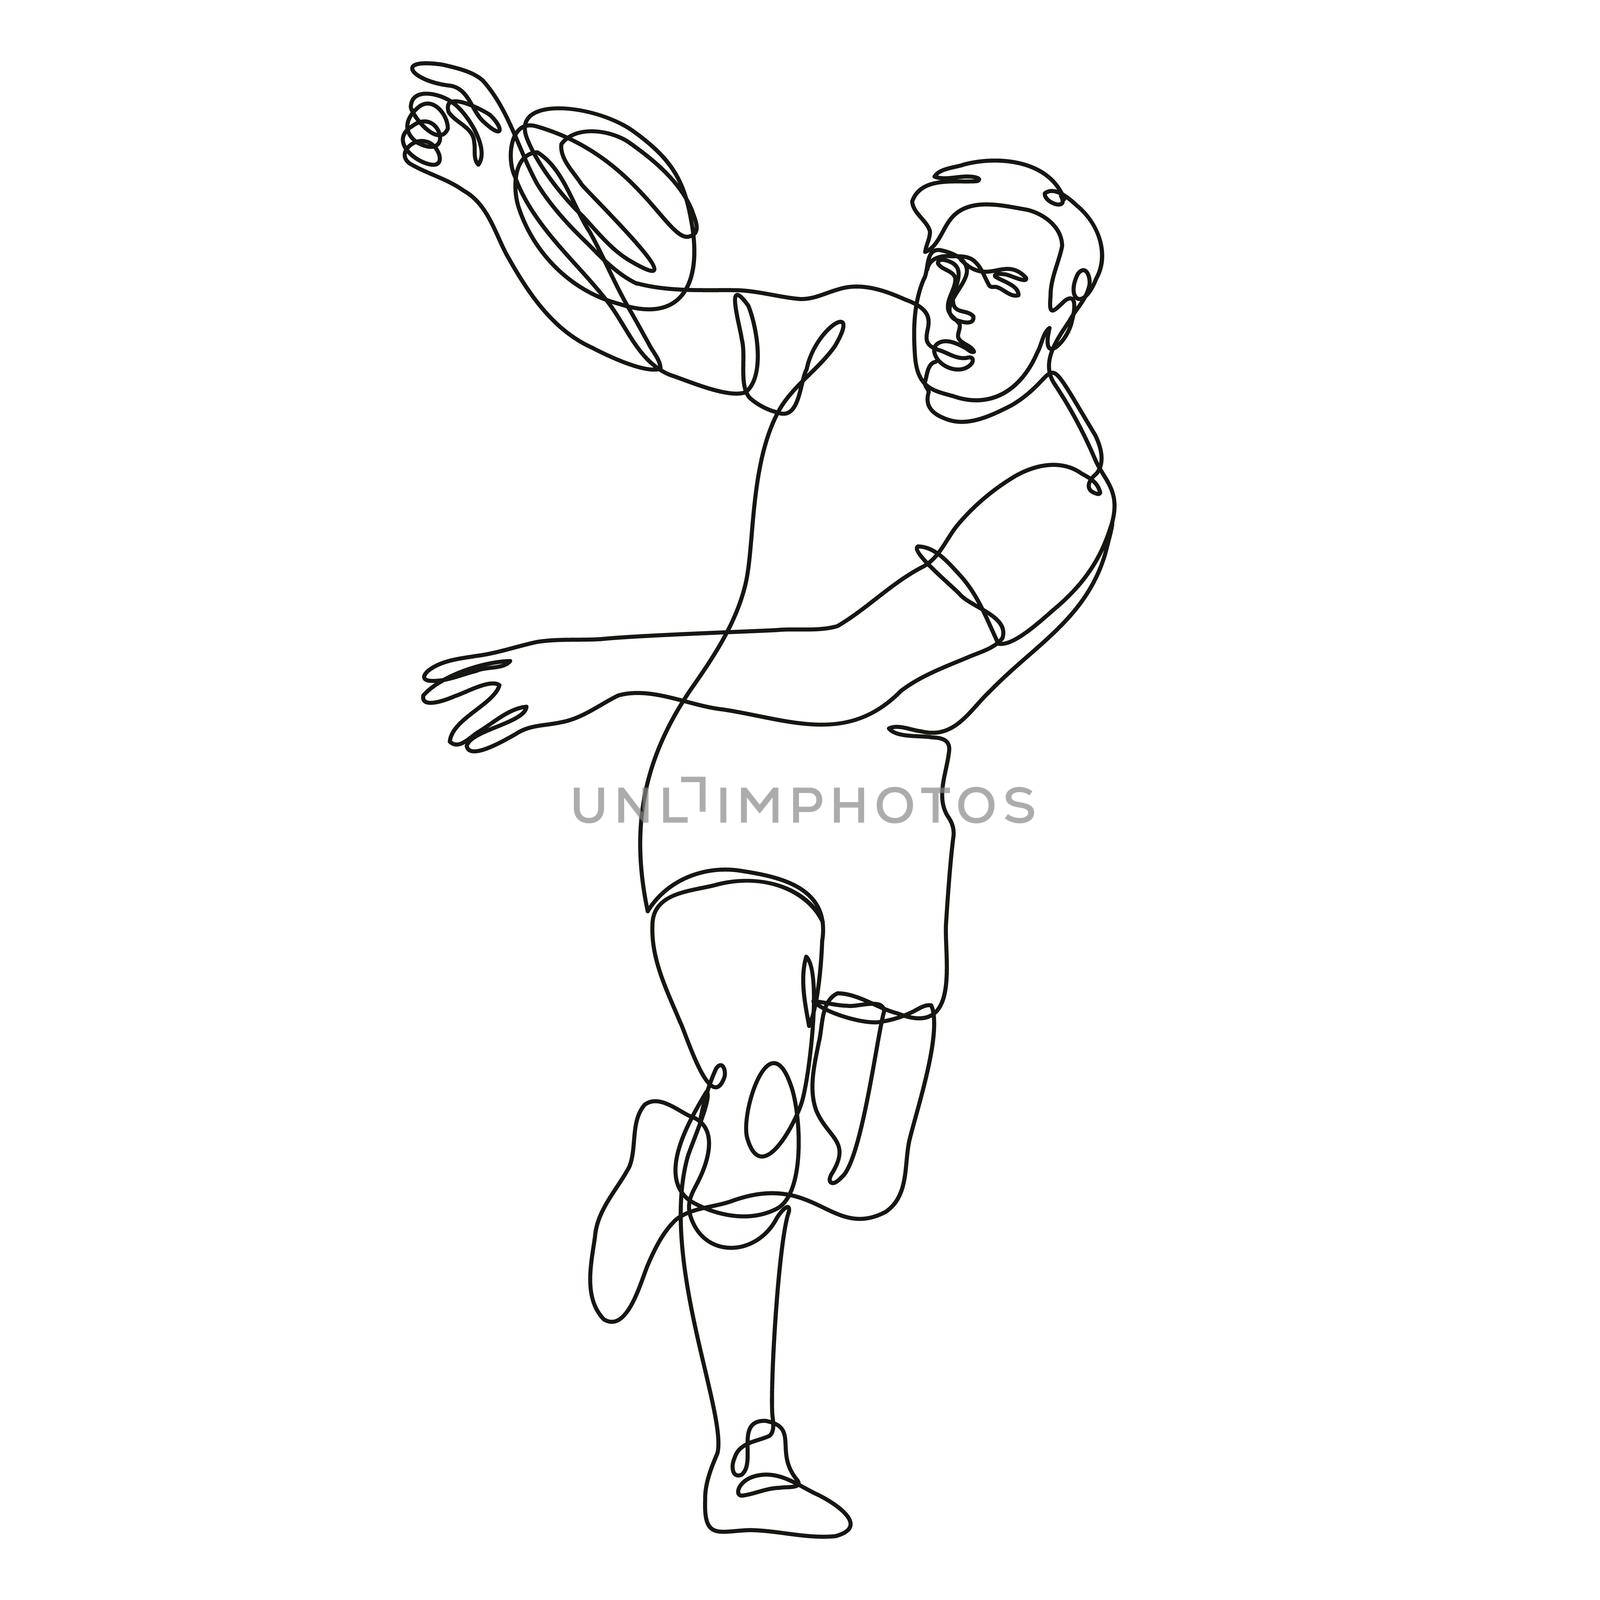 Continuous line drawing illustration of a rugby union player running passing ball front view done in mono line or doodle style in black and white on isolated background. 